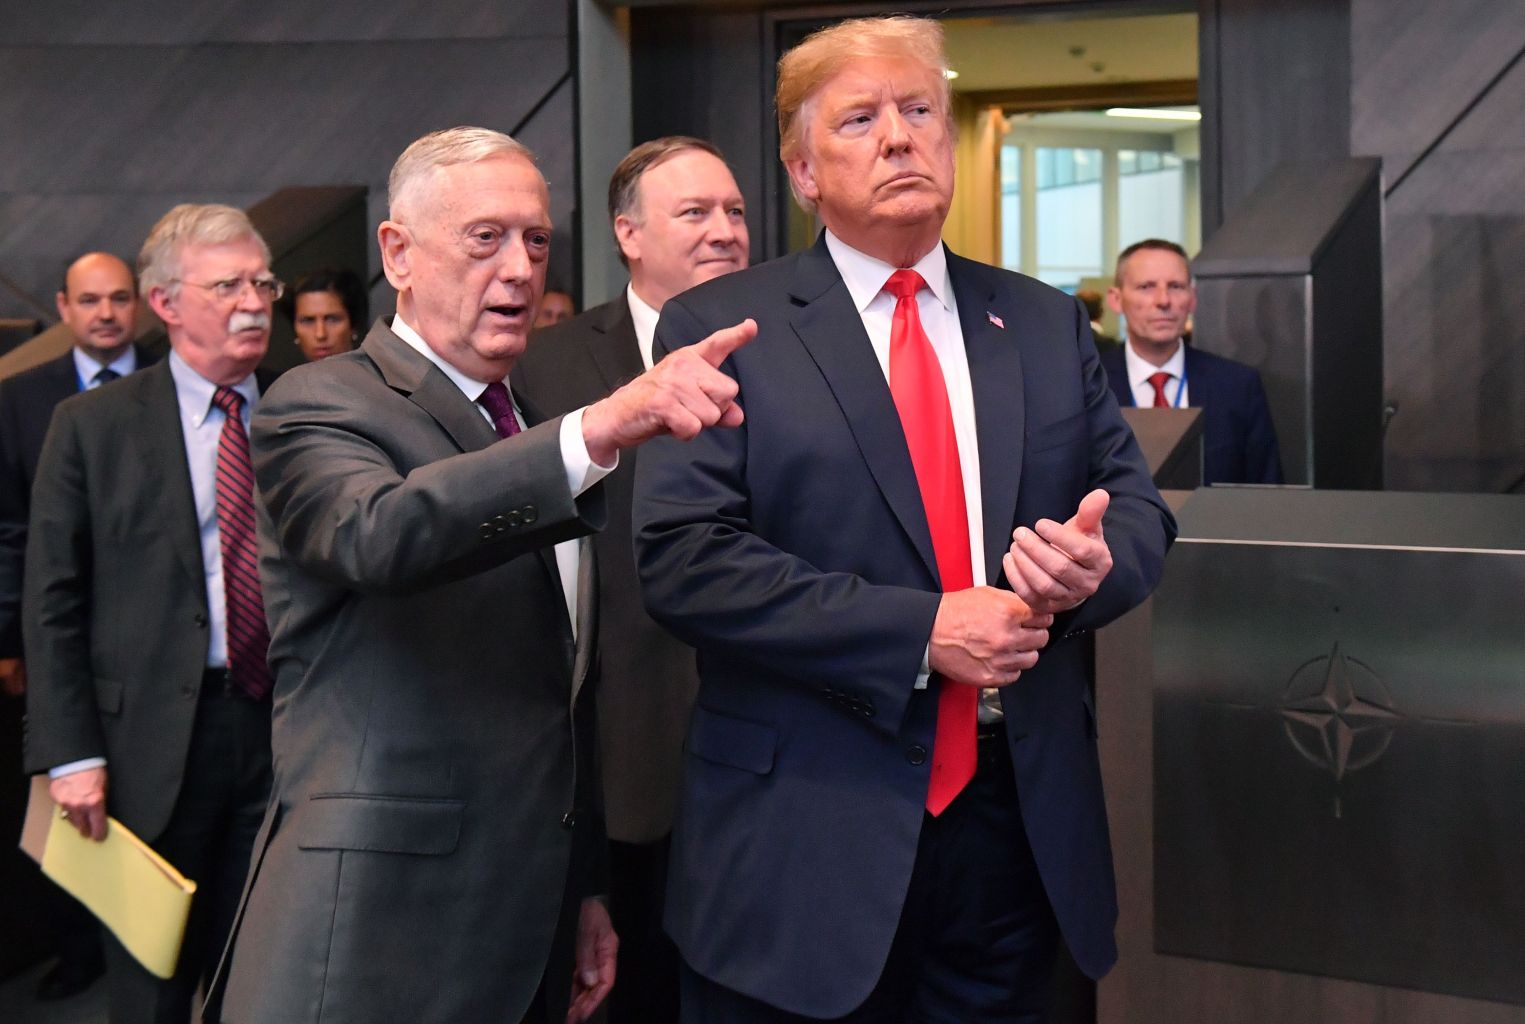 President Donald Trump walks with Secretary of Defence James Mattis, Secretary of State Mike Pompeo, and National Security Adviser John Bolton at the NATO headquarters in Brussels, on July 11. (Emmanuel Dunand/AFP/Getty Images)